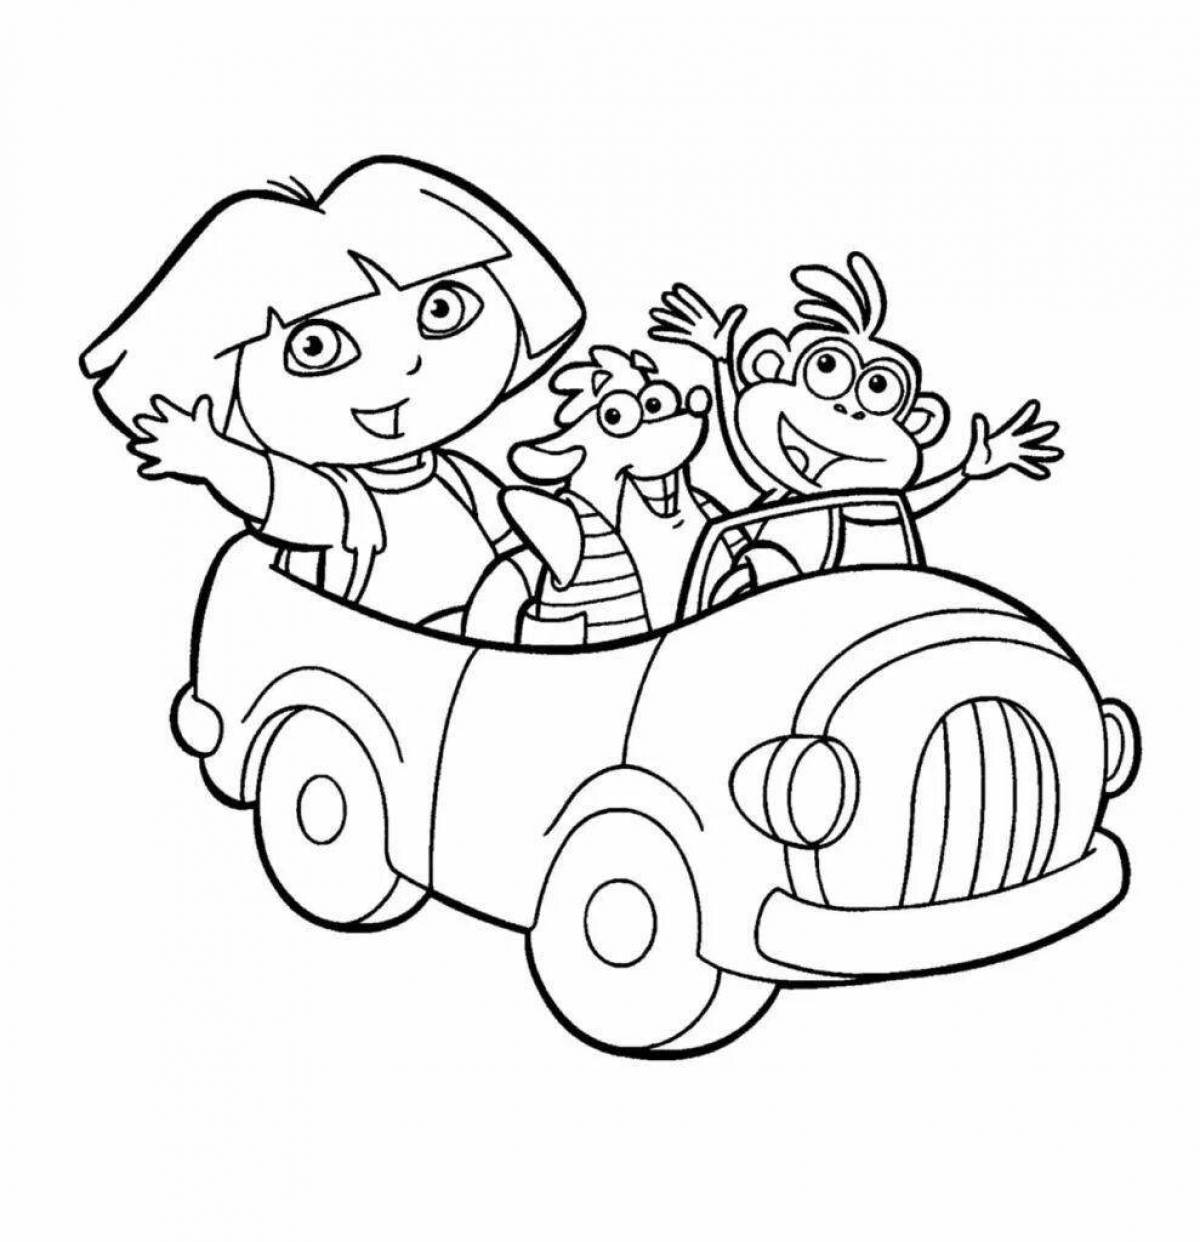 Glowing smart and wonder bag coloring page